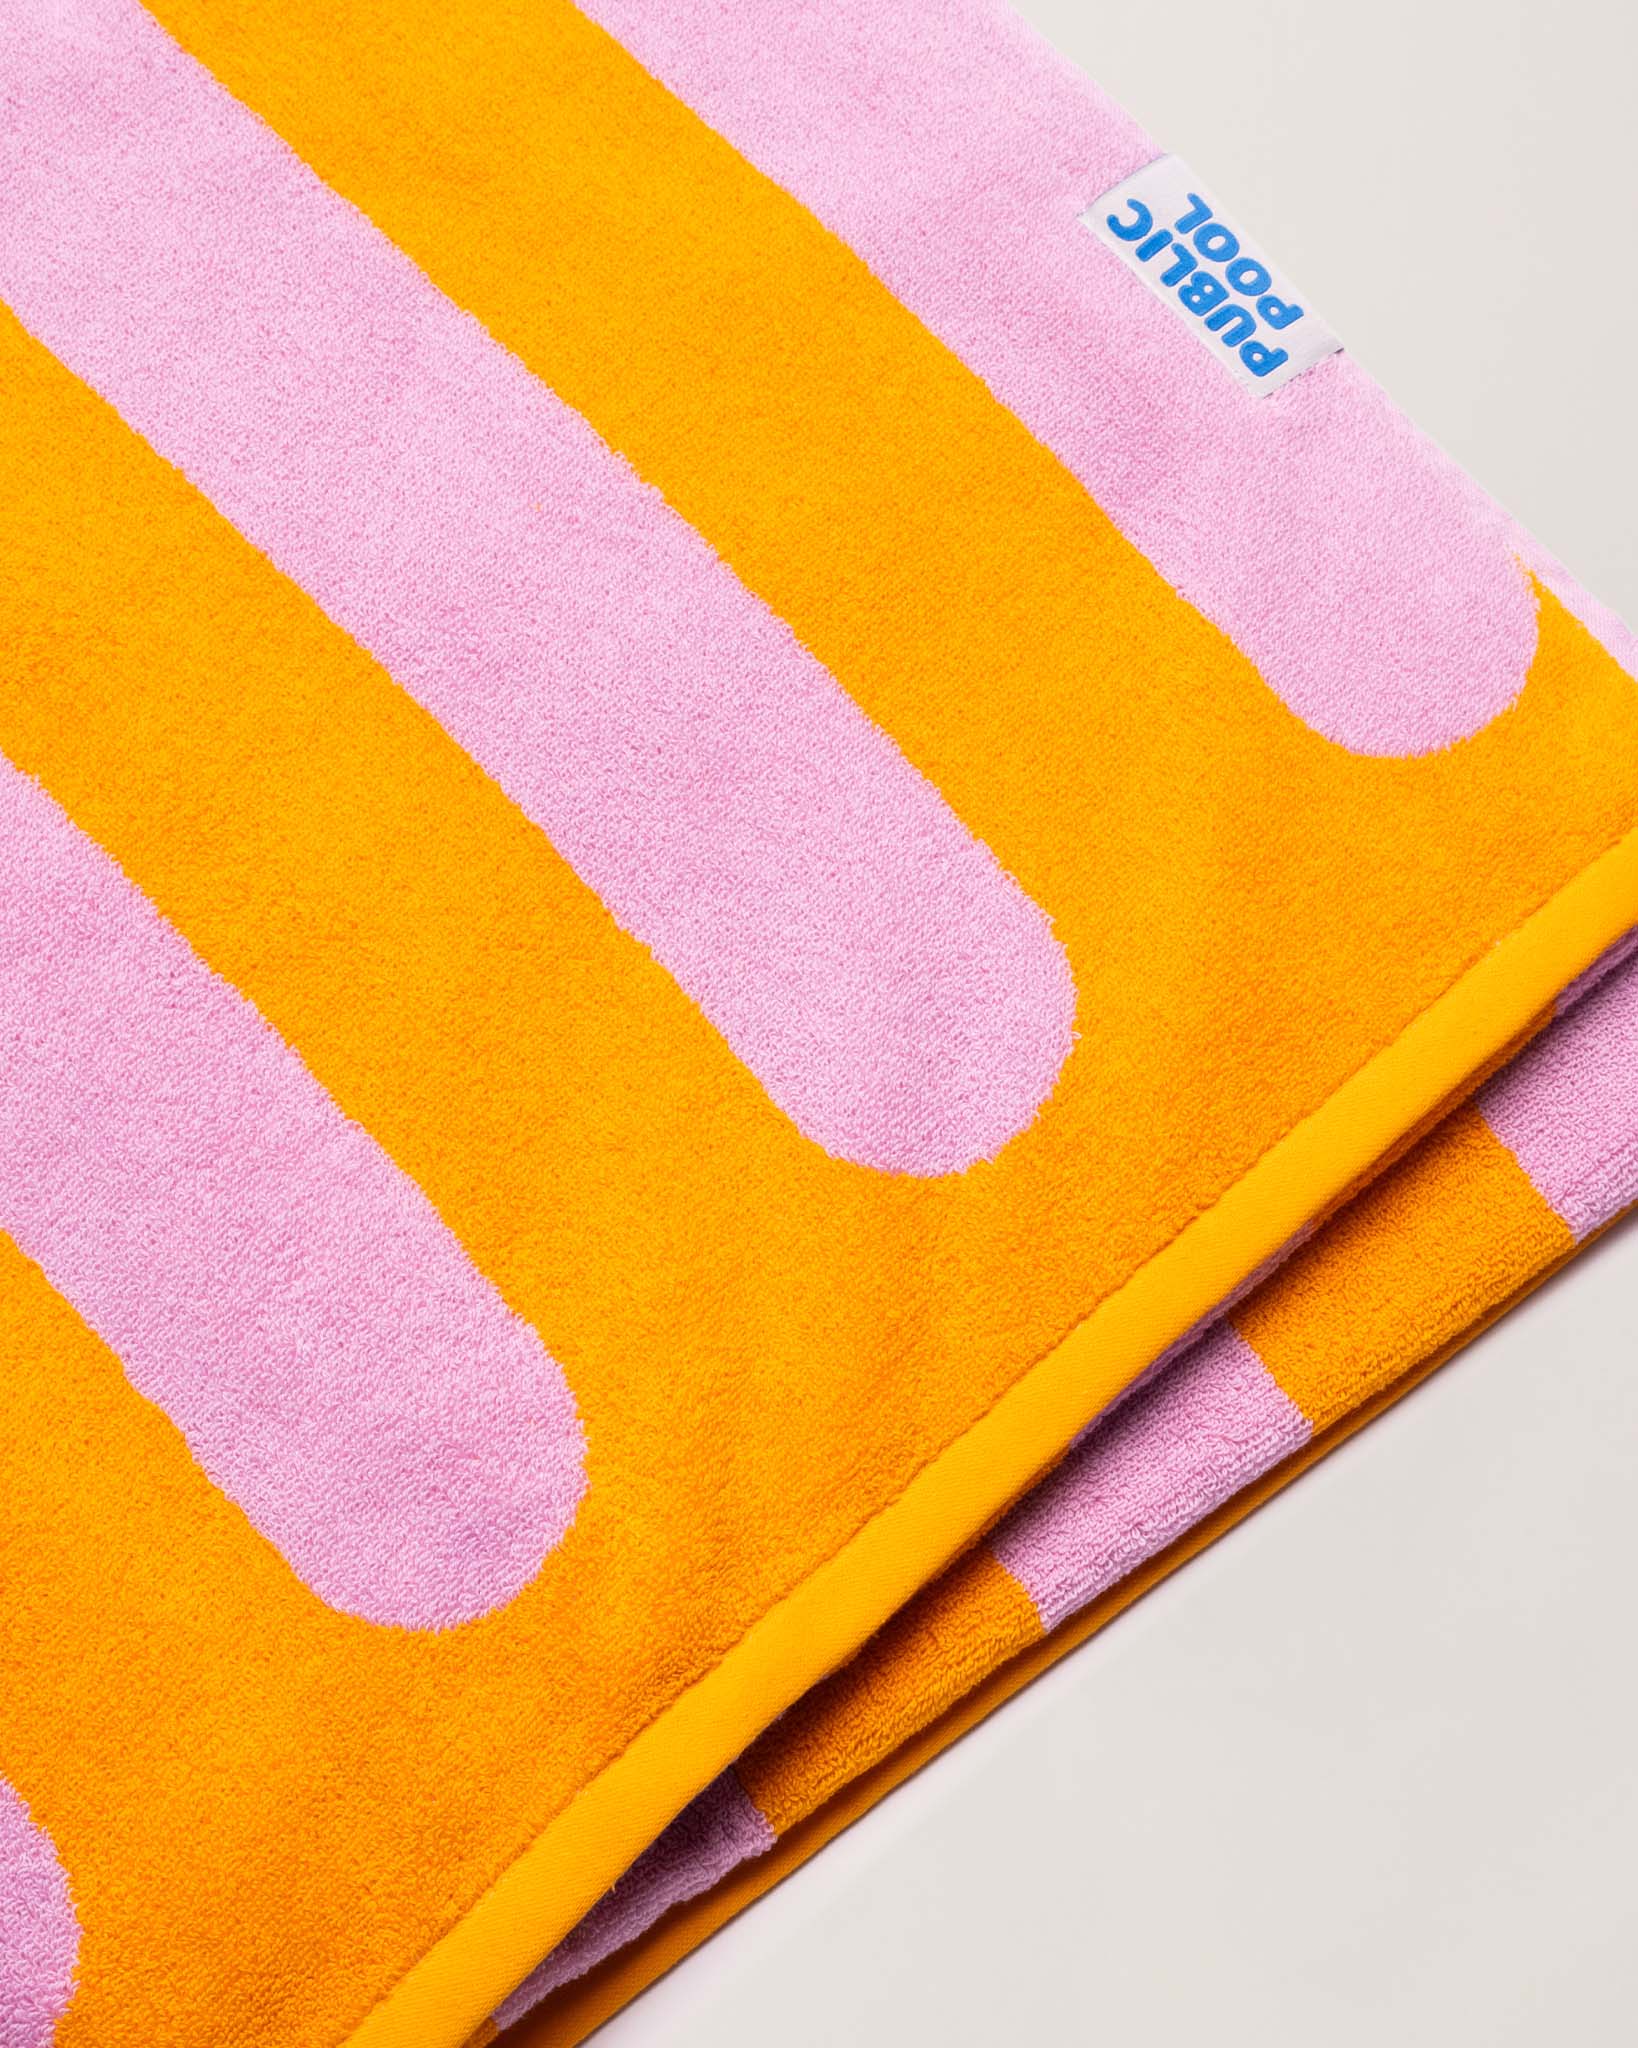 A folded pink and orange striped towel. 